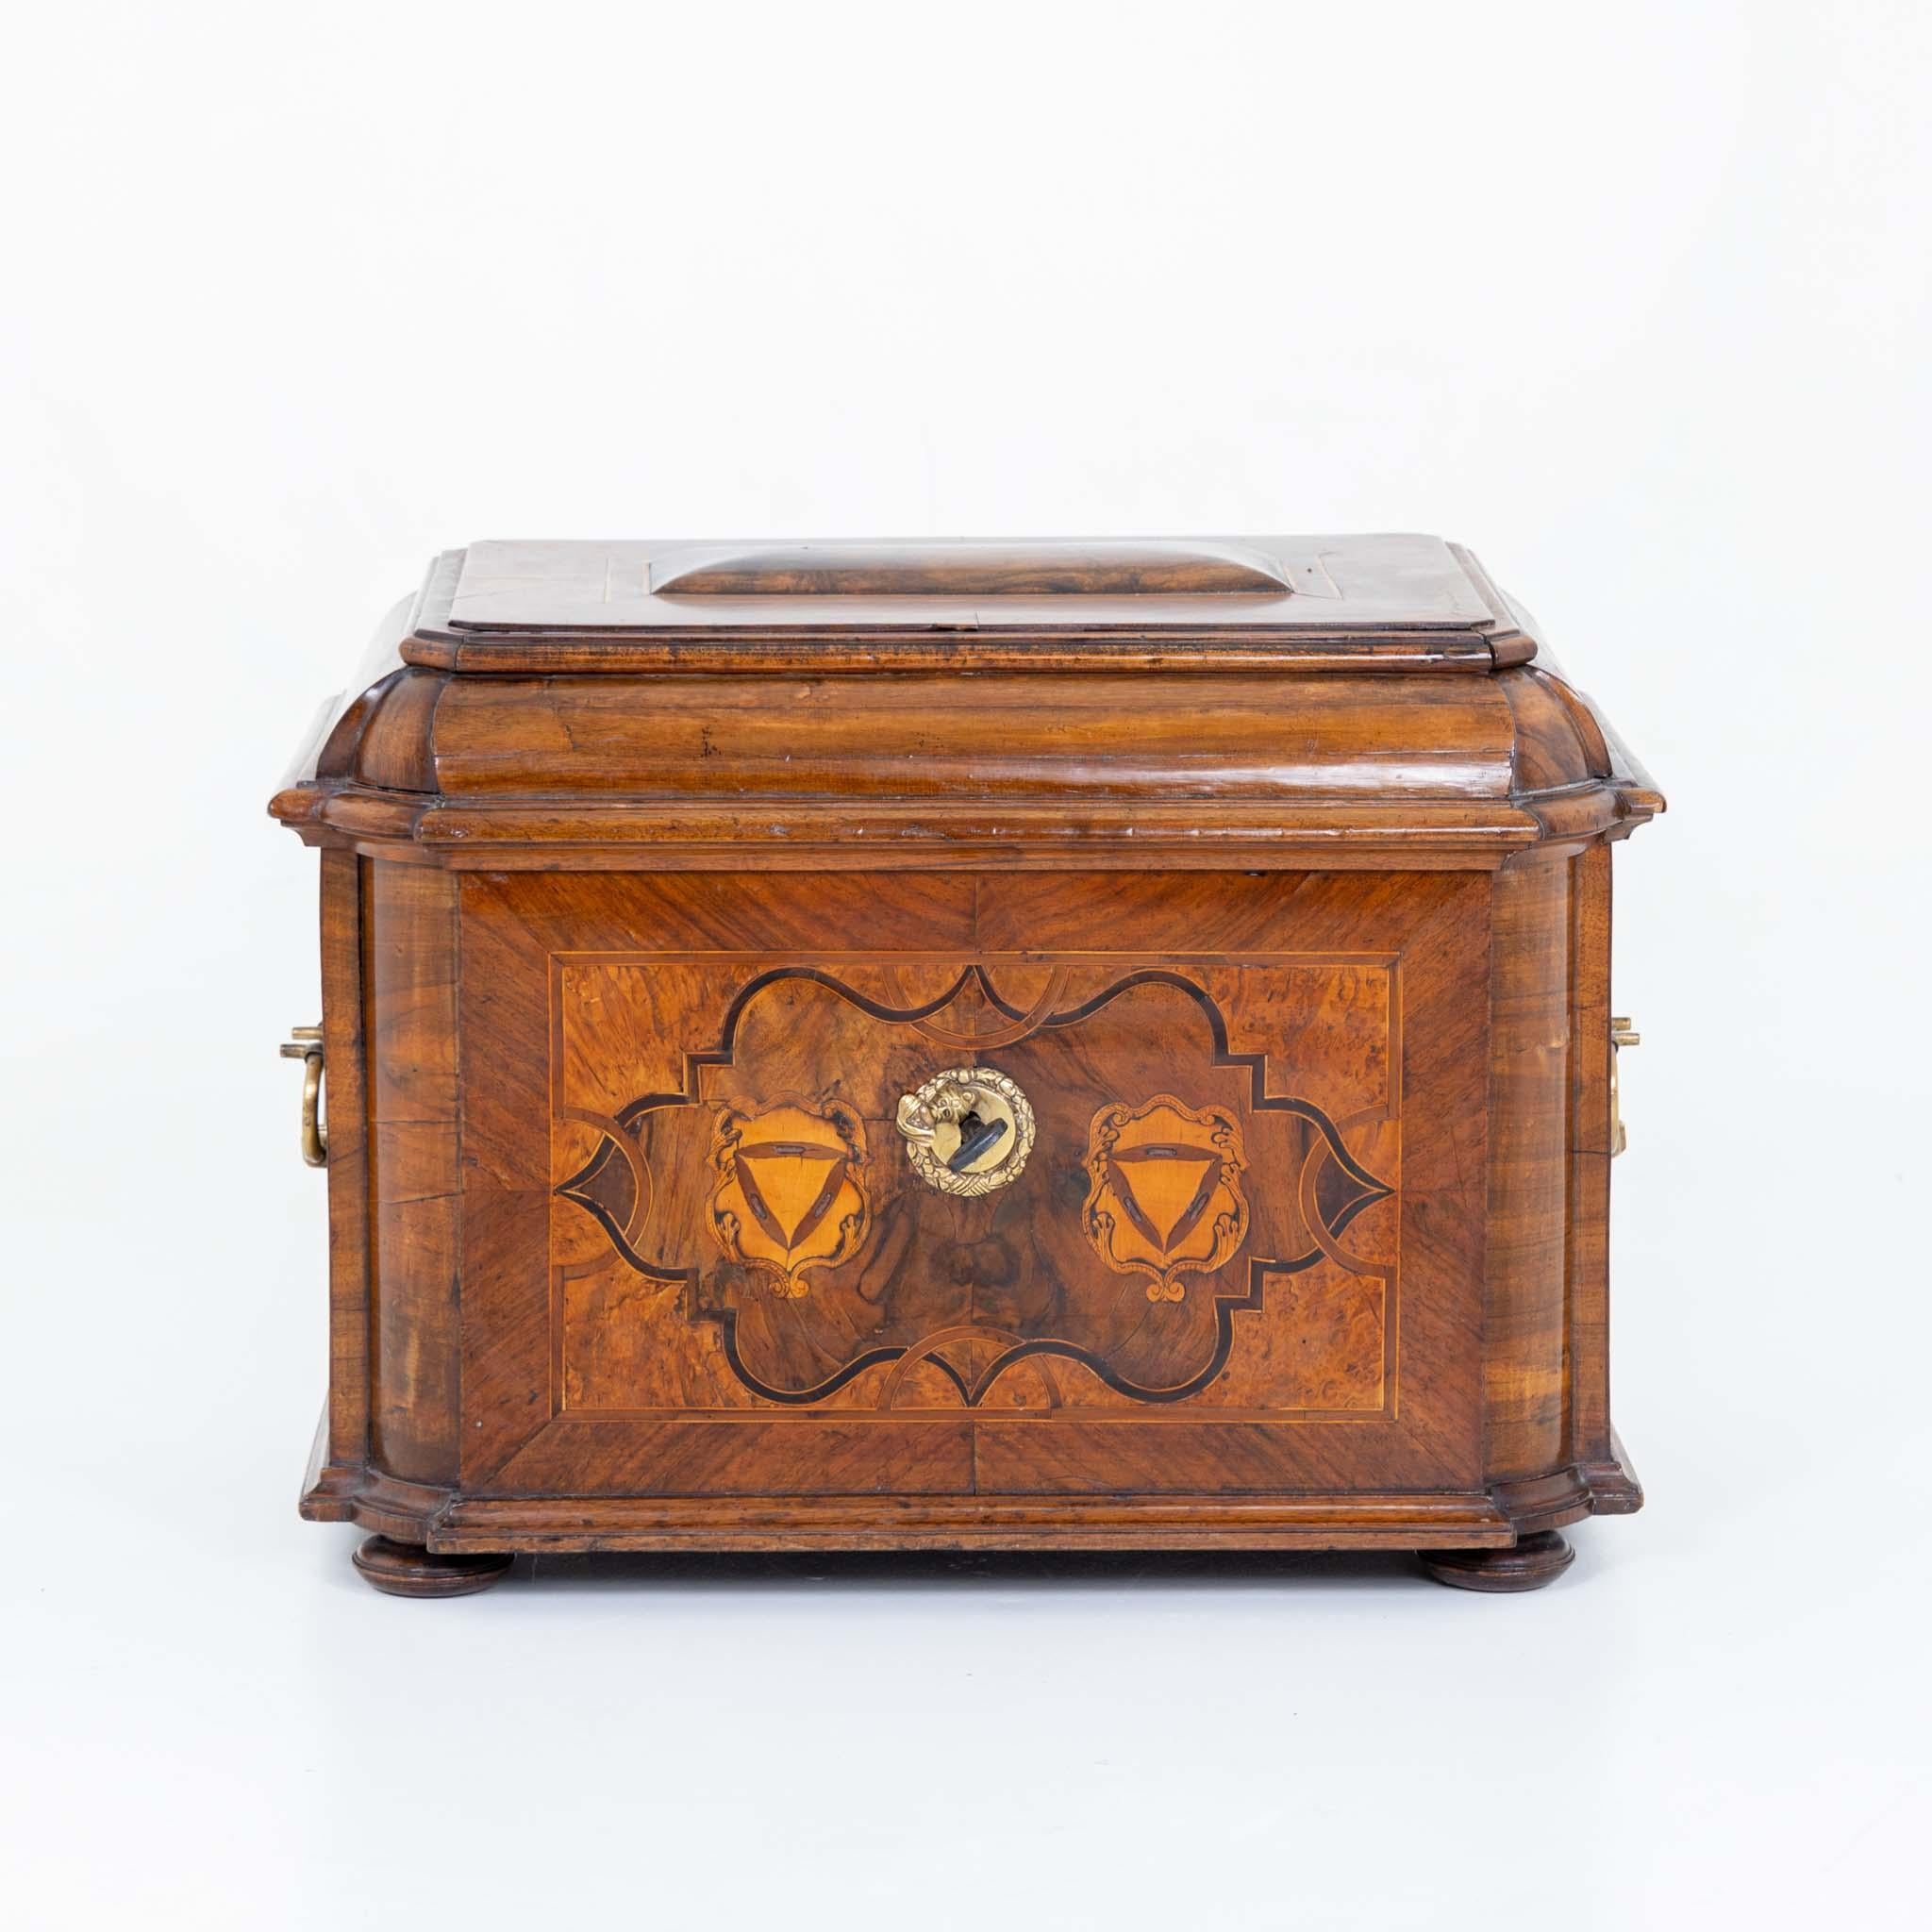 Baroque guild drawer with side brass handles and domed lid. The body stands on pressed ball feet, has rounded corners and is veneered on all sides in walnut with strapwork marquetry.